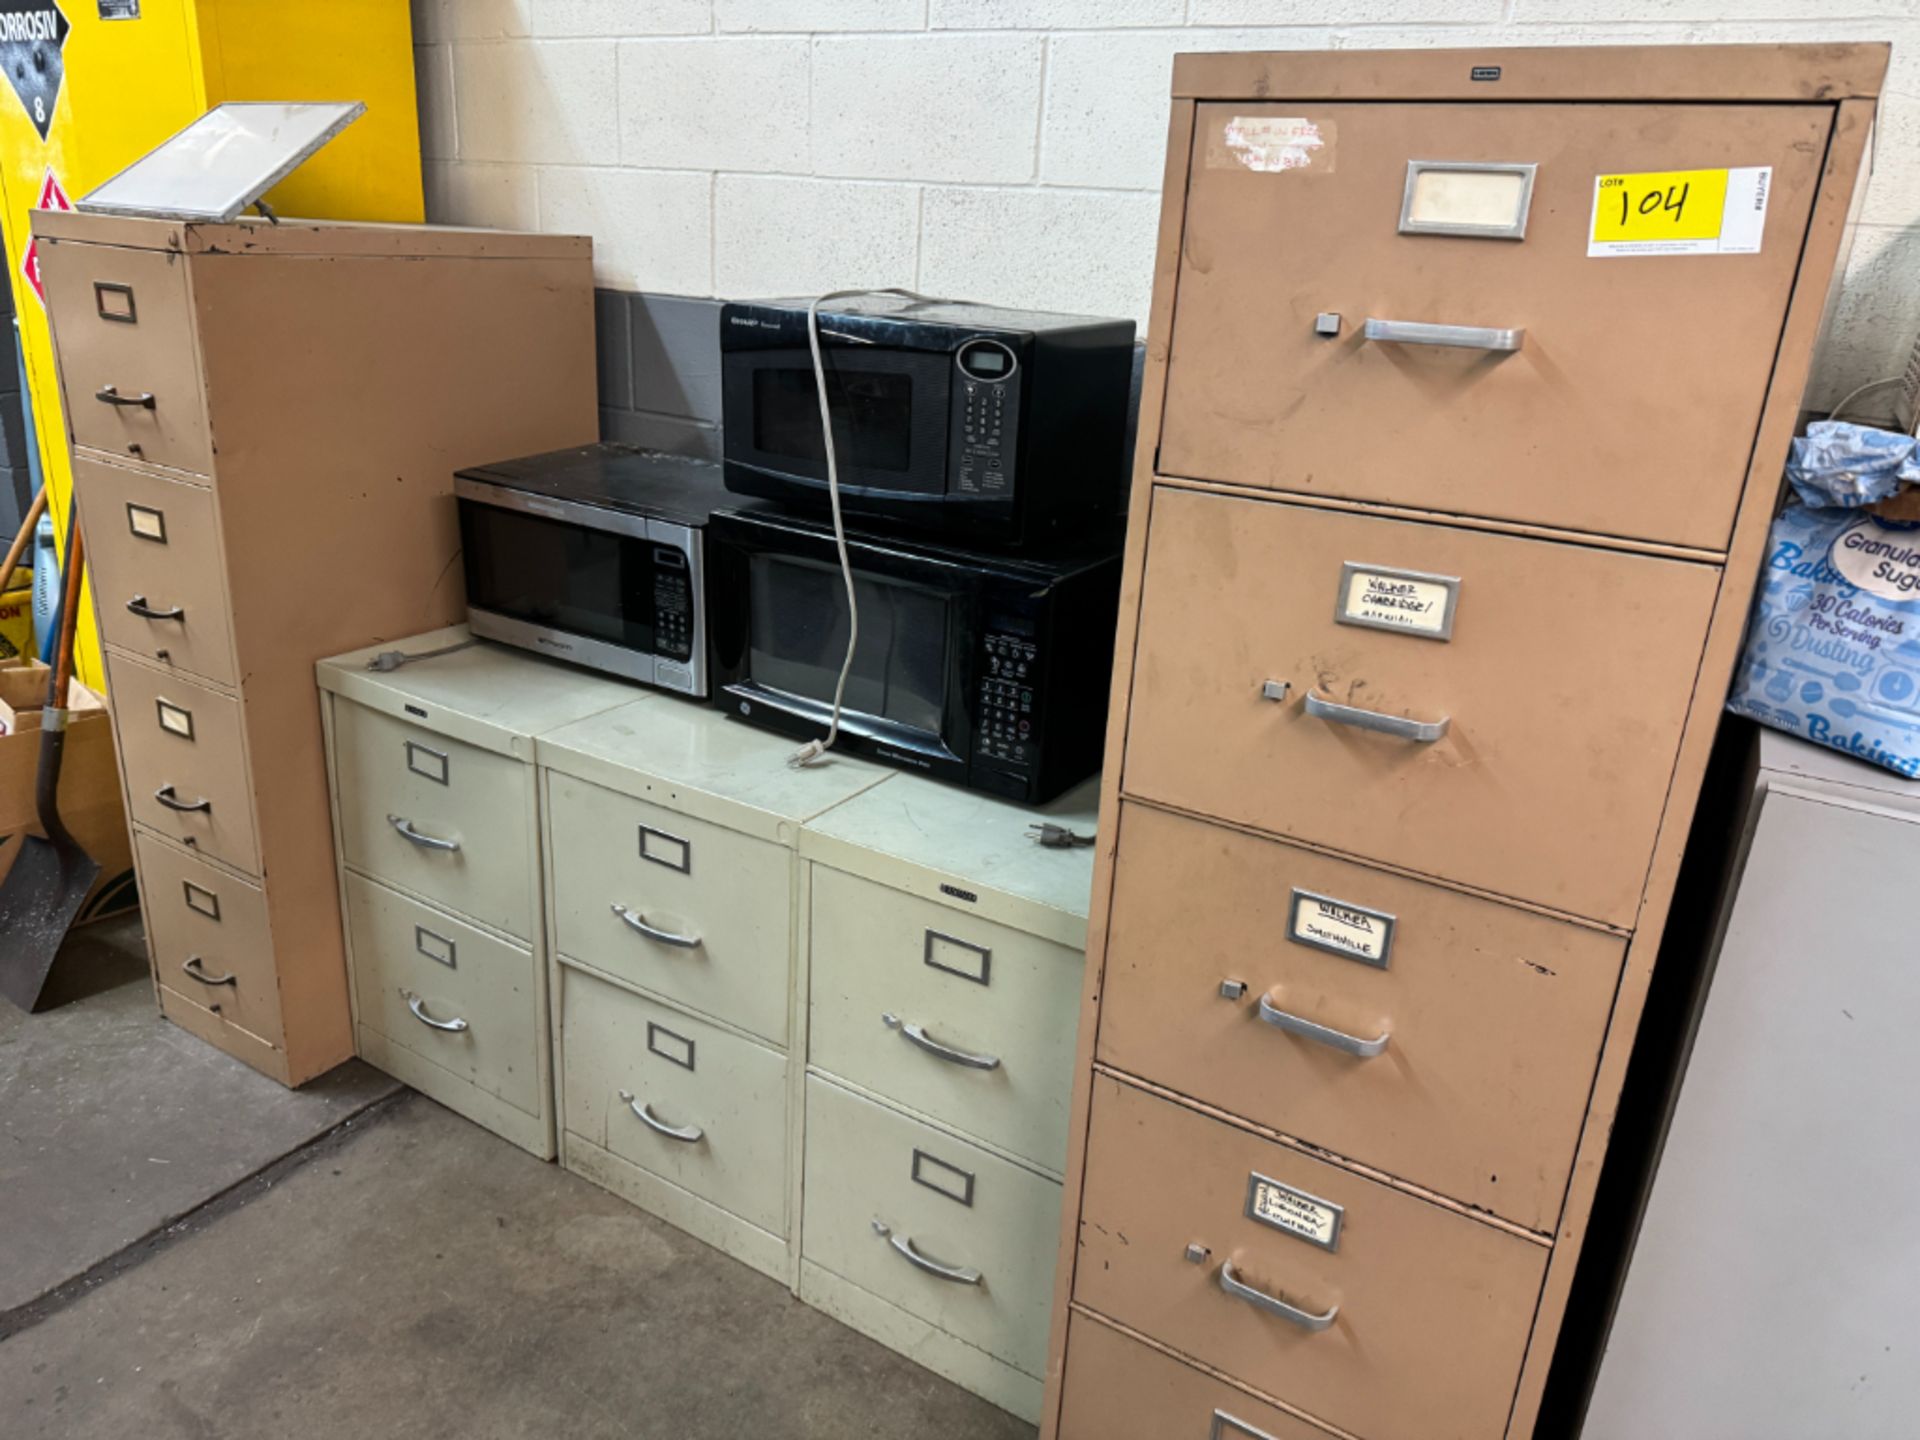 File Cabinets, Microwaves, Coffee Maker Cabinets w/ Shop Rags - Image 5 of 7